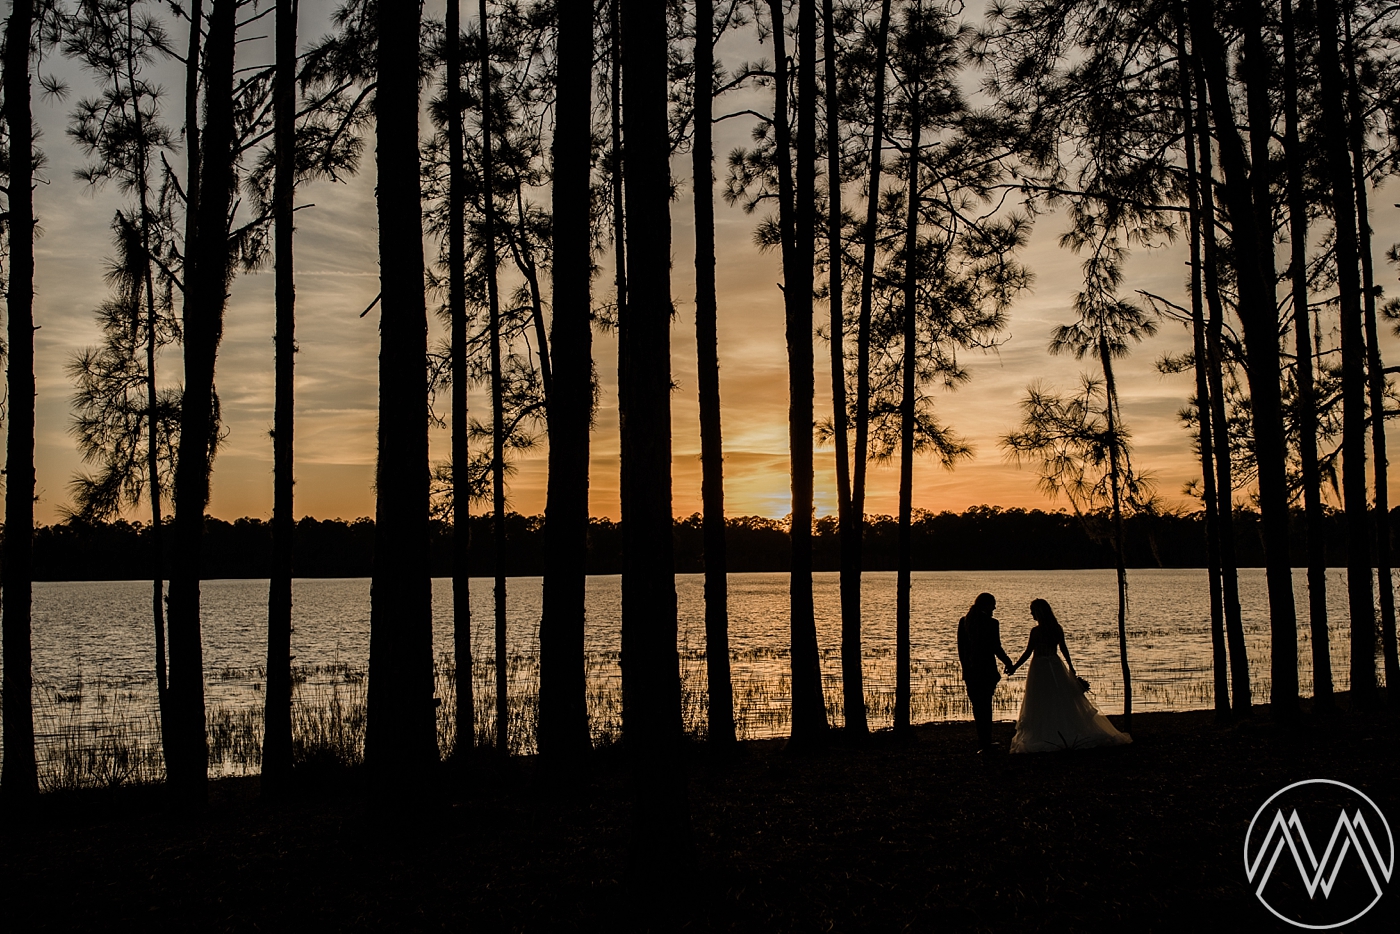 Sunset bride and groom portraits at Doe Lake Campground in the Ocala National Forest. Photographed by Destination Wedding Photographer, Megan Montalvo Photography. 